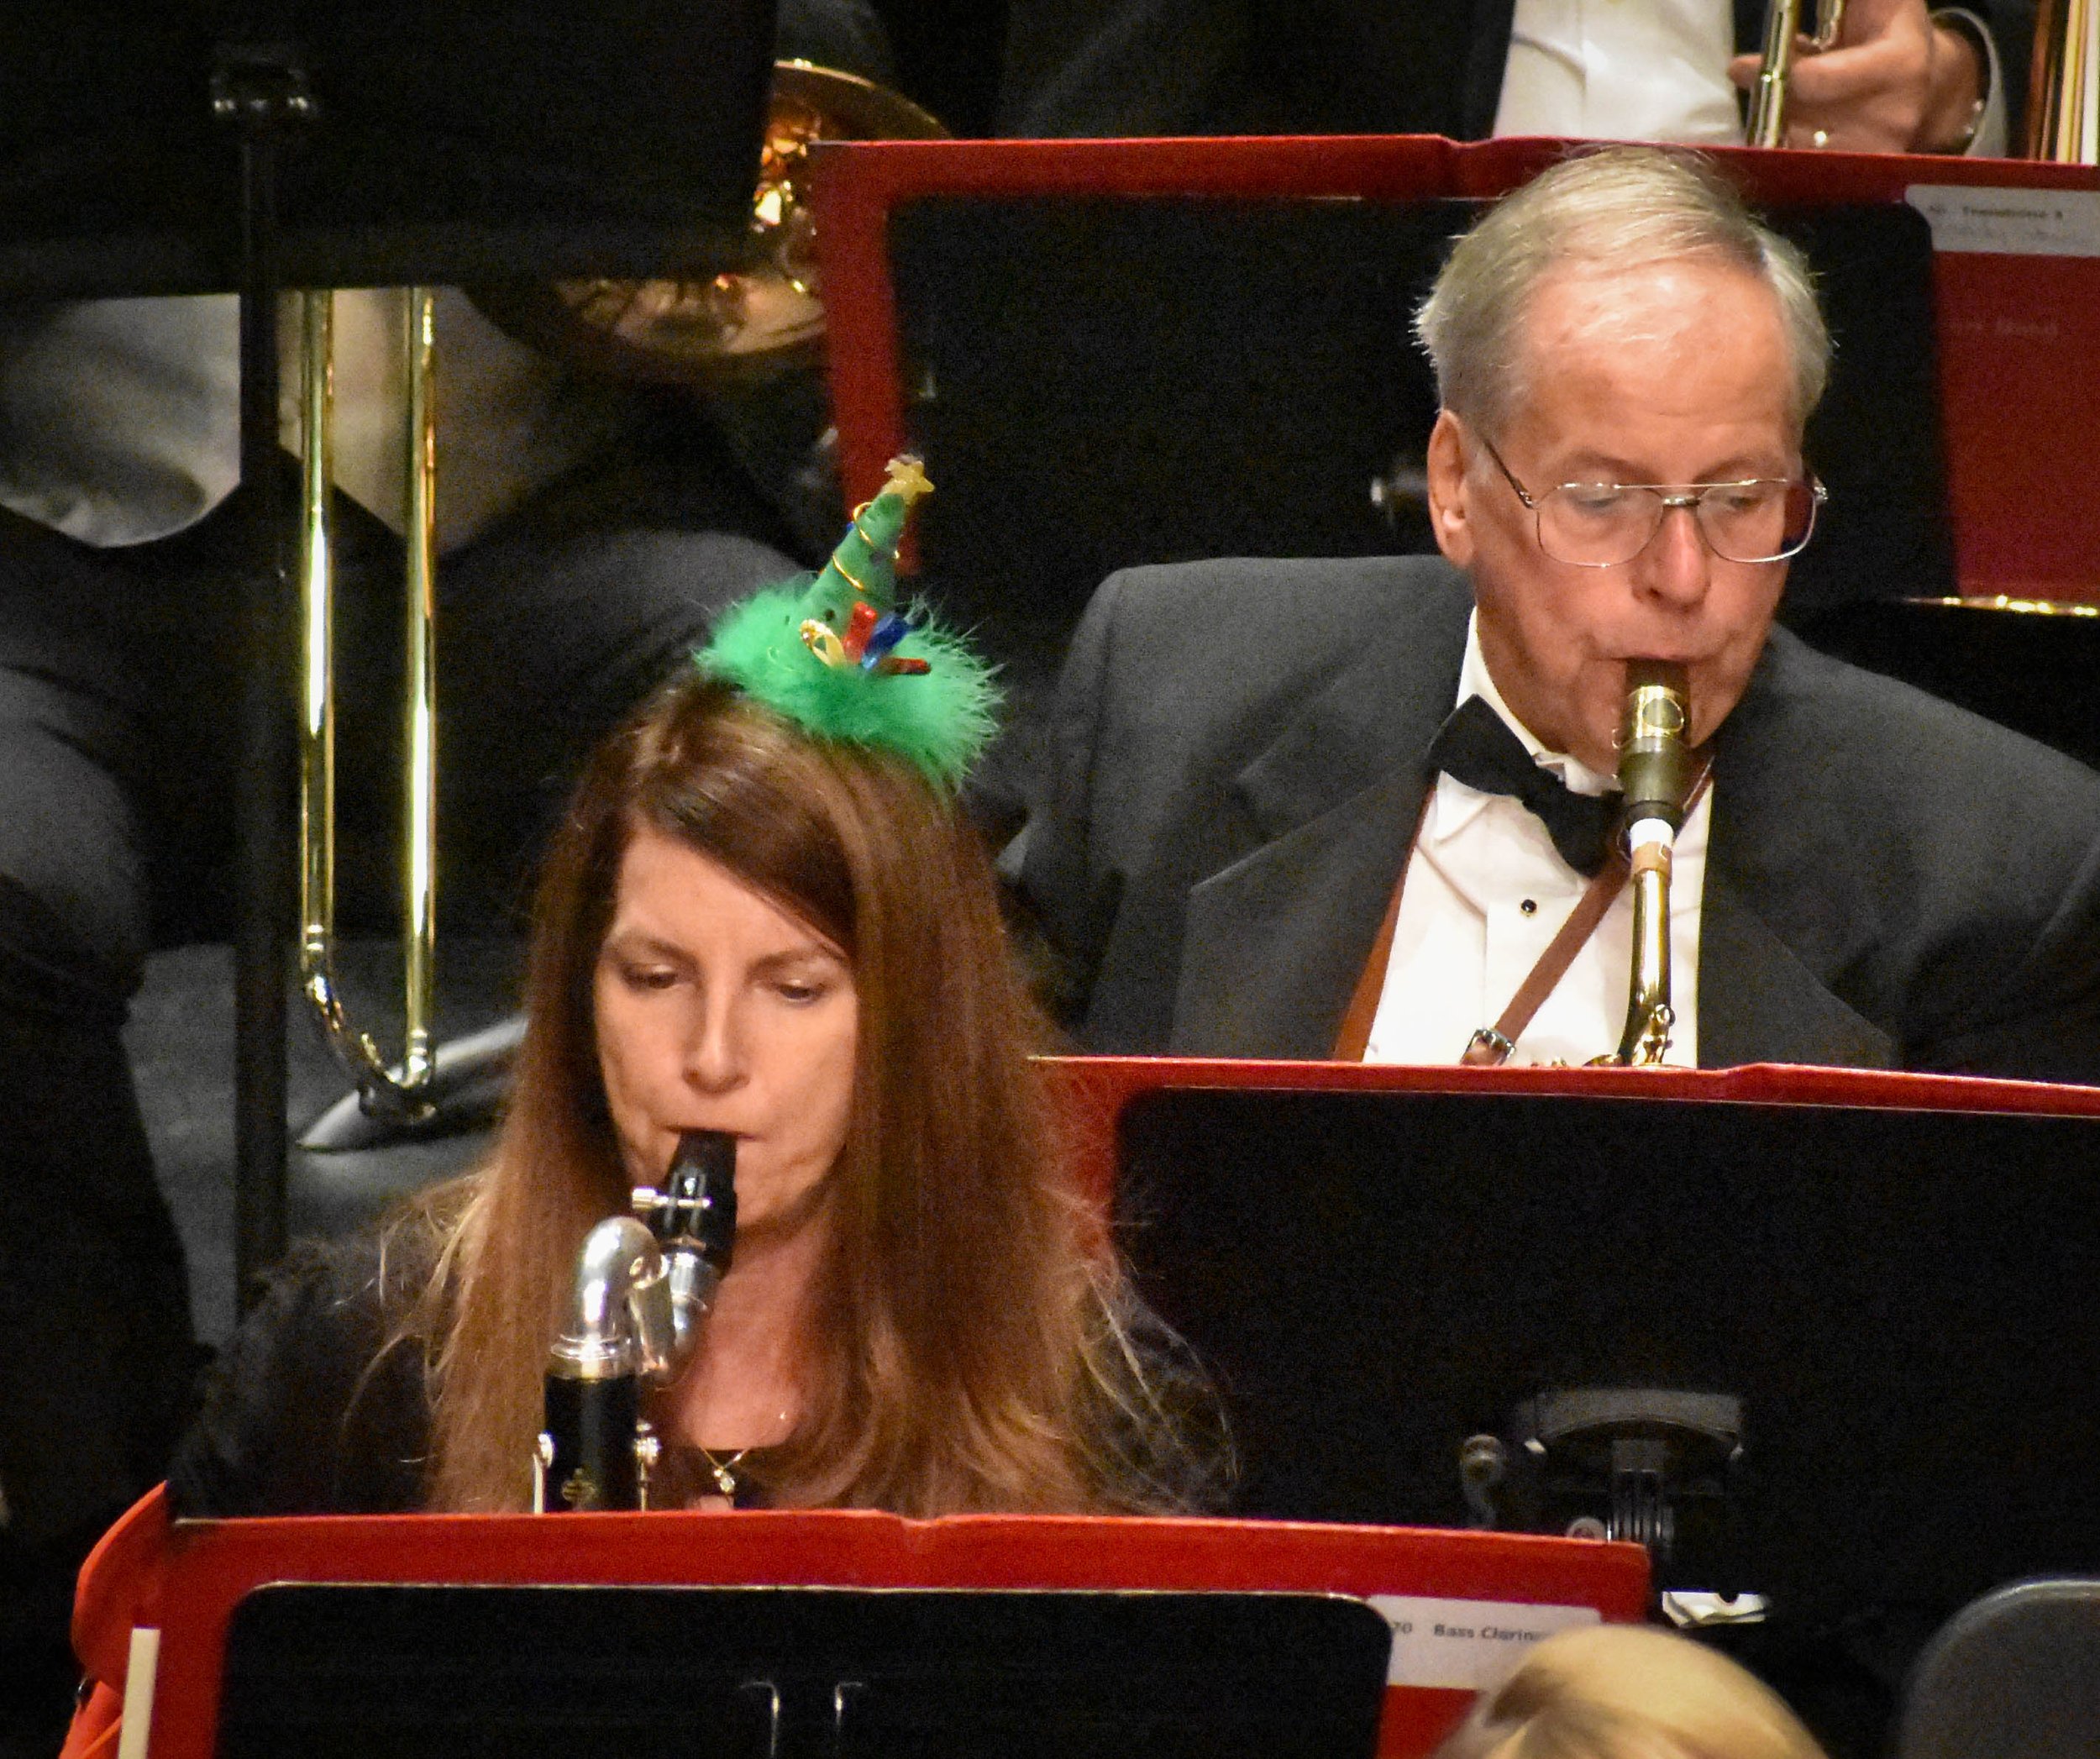 12-18-2022 LCCB Holiday Concert by Peyton Webster47-38.jpg